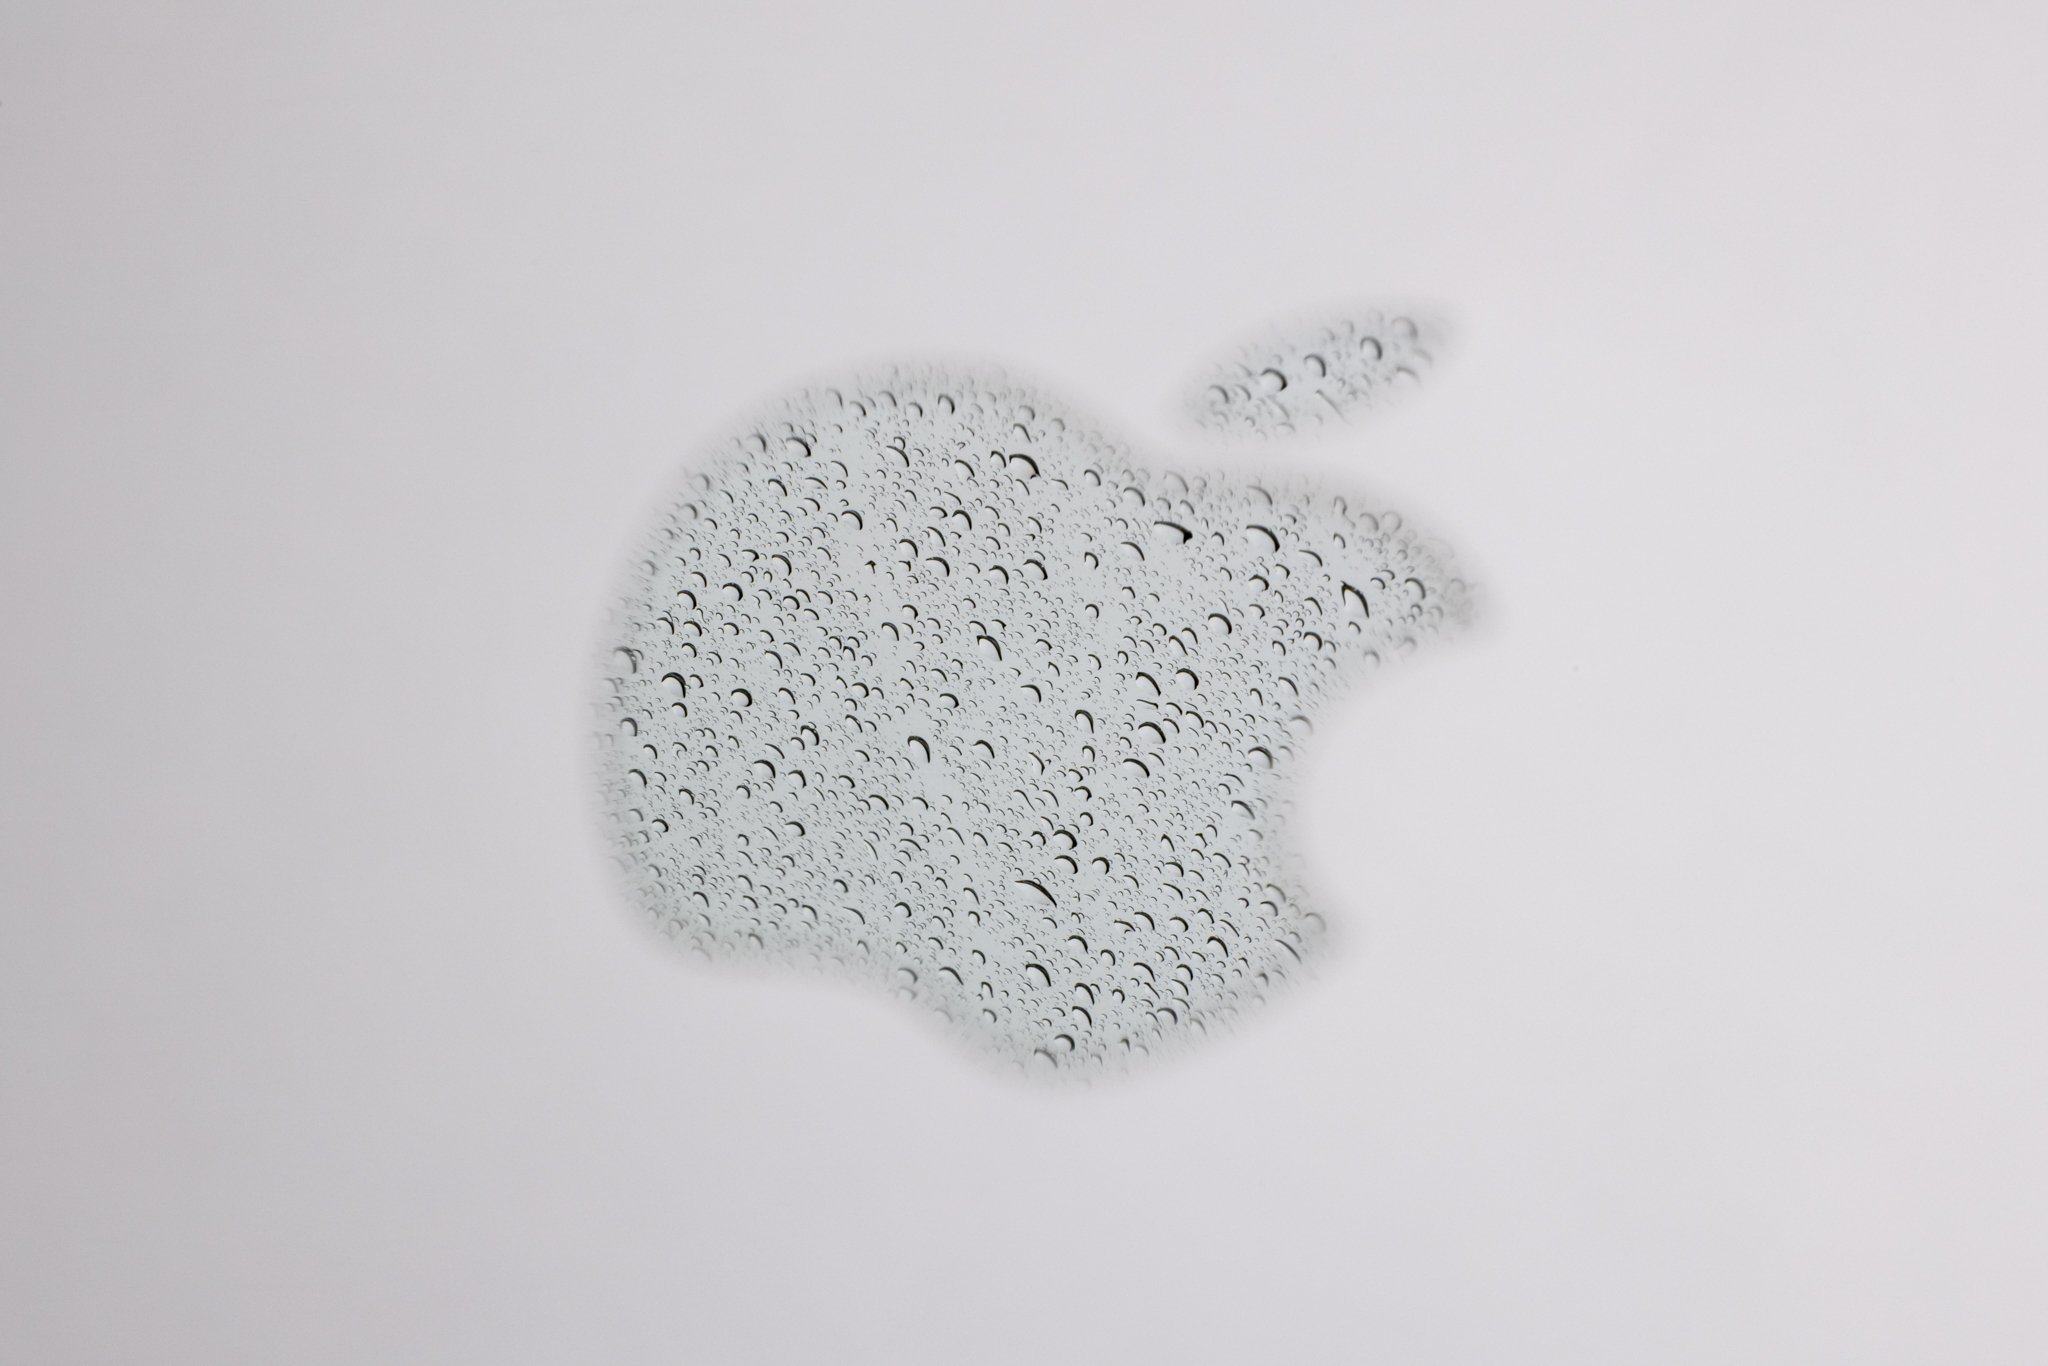 A reflection of rain in the Apple logo on a laptop photographed at f/29